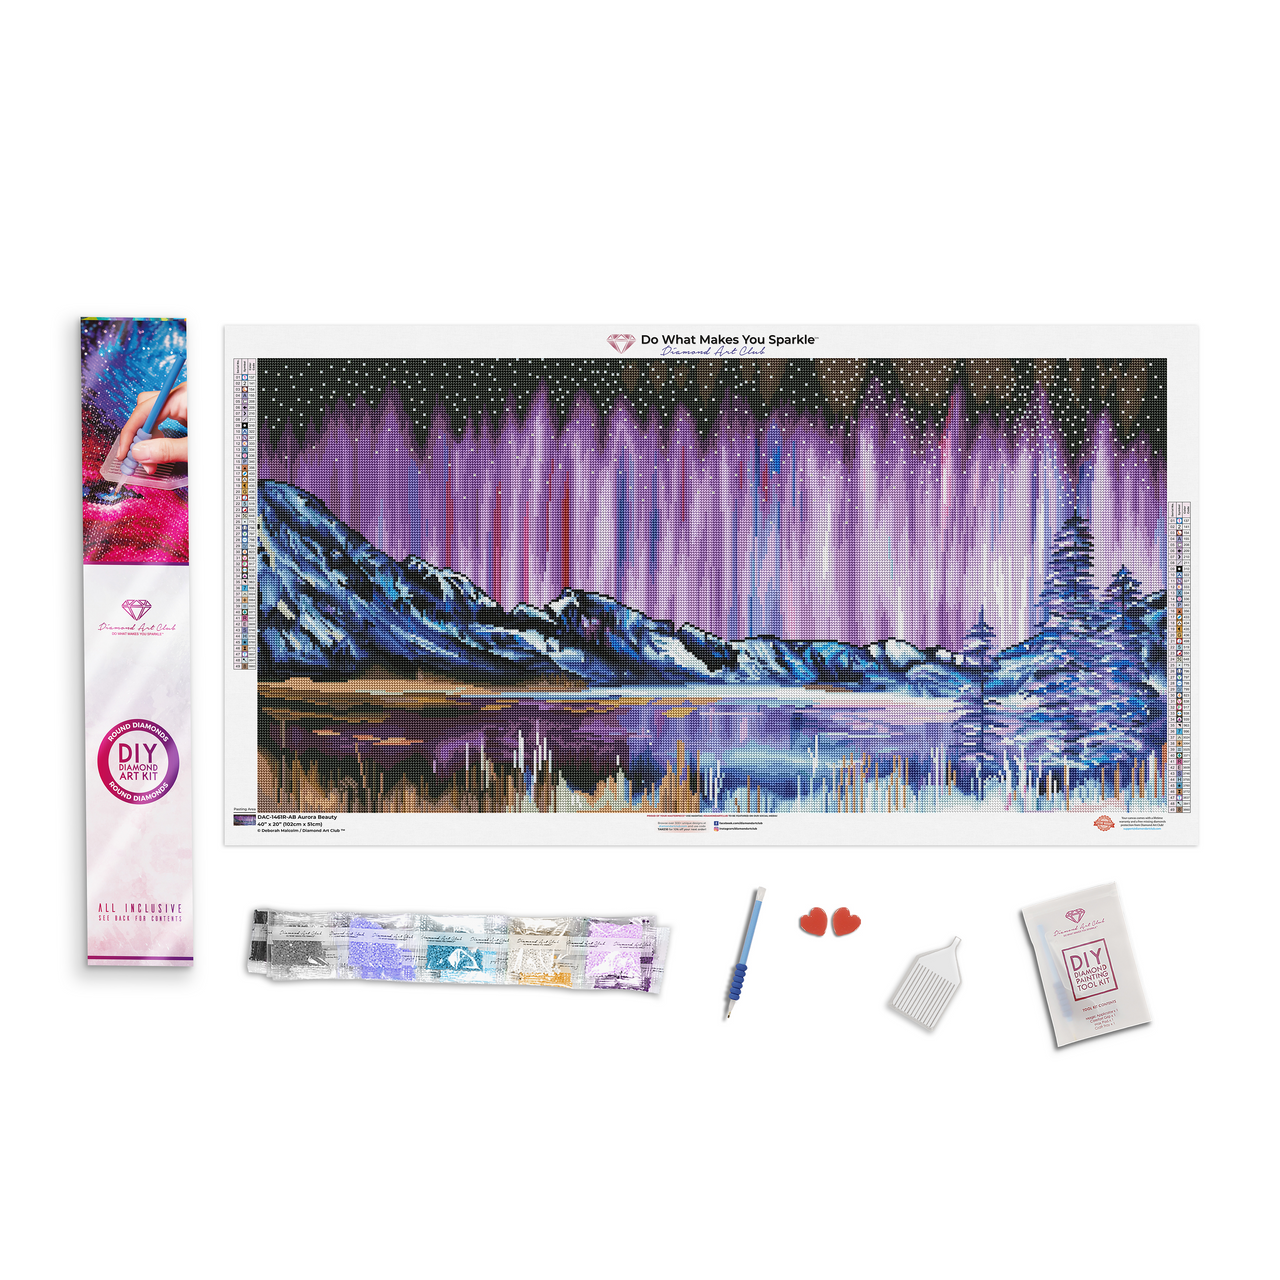 Diamond Painting Aurora Beauty 40" x 20″ (102cm x 51cm) / Round with 49 Colors including 2 ABs / 65,521